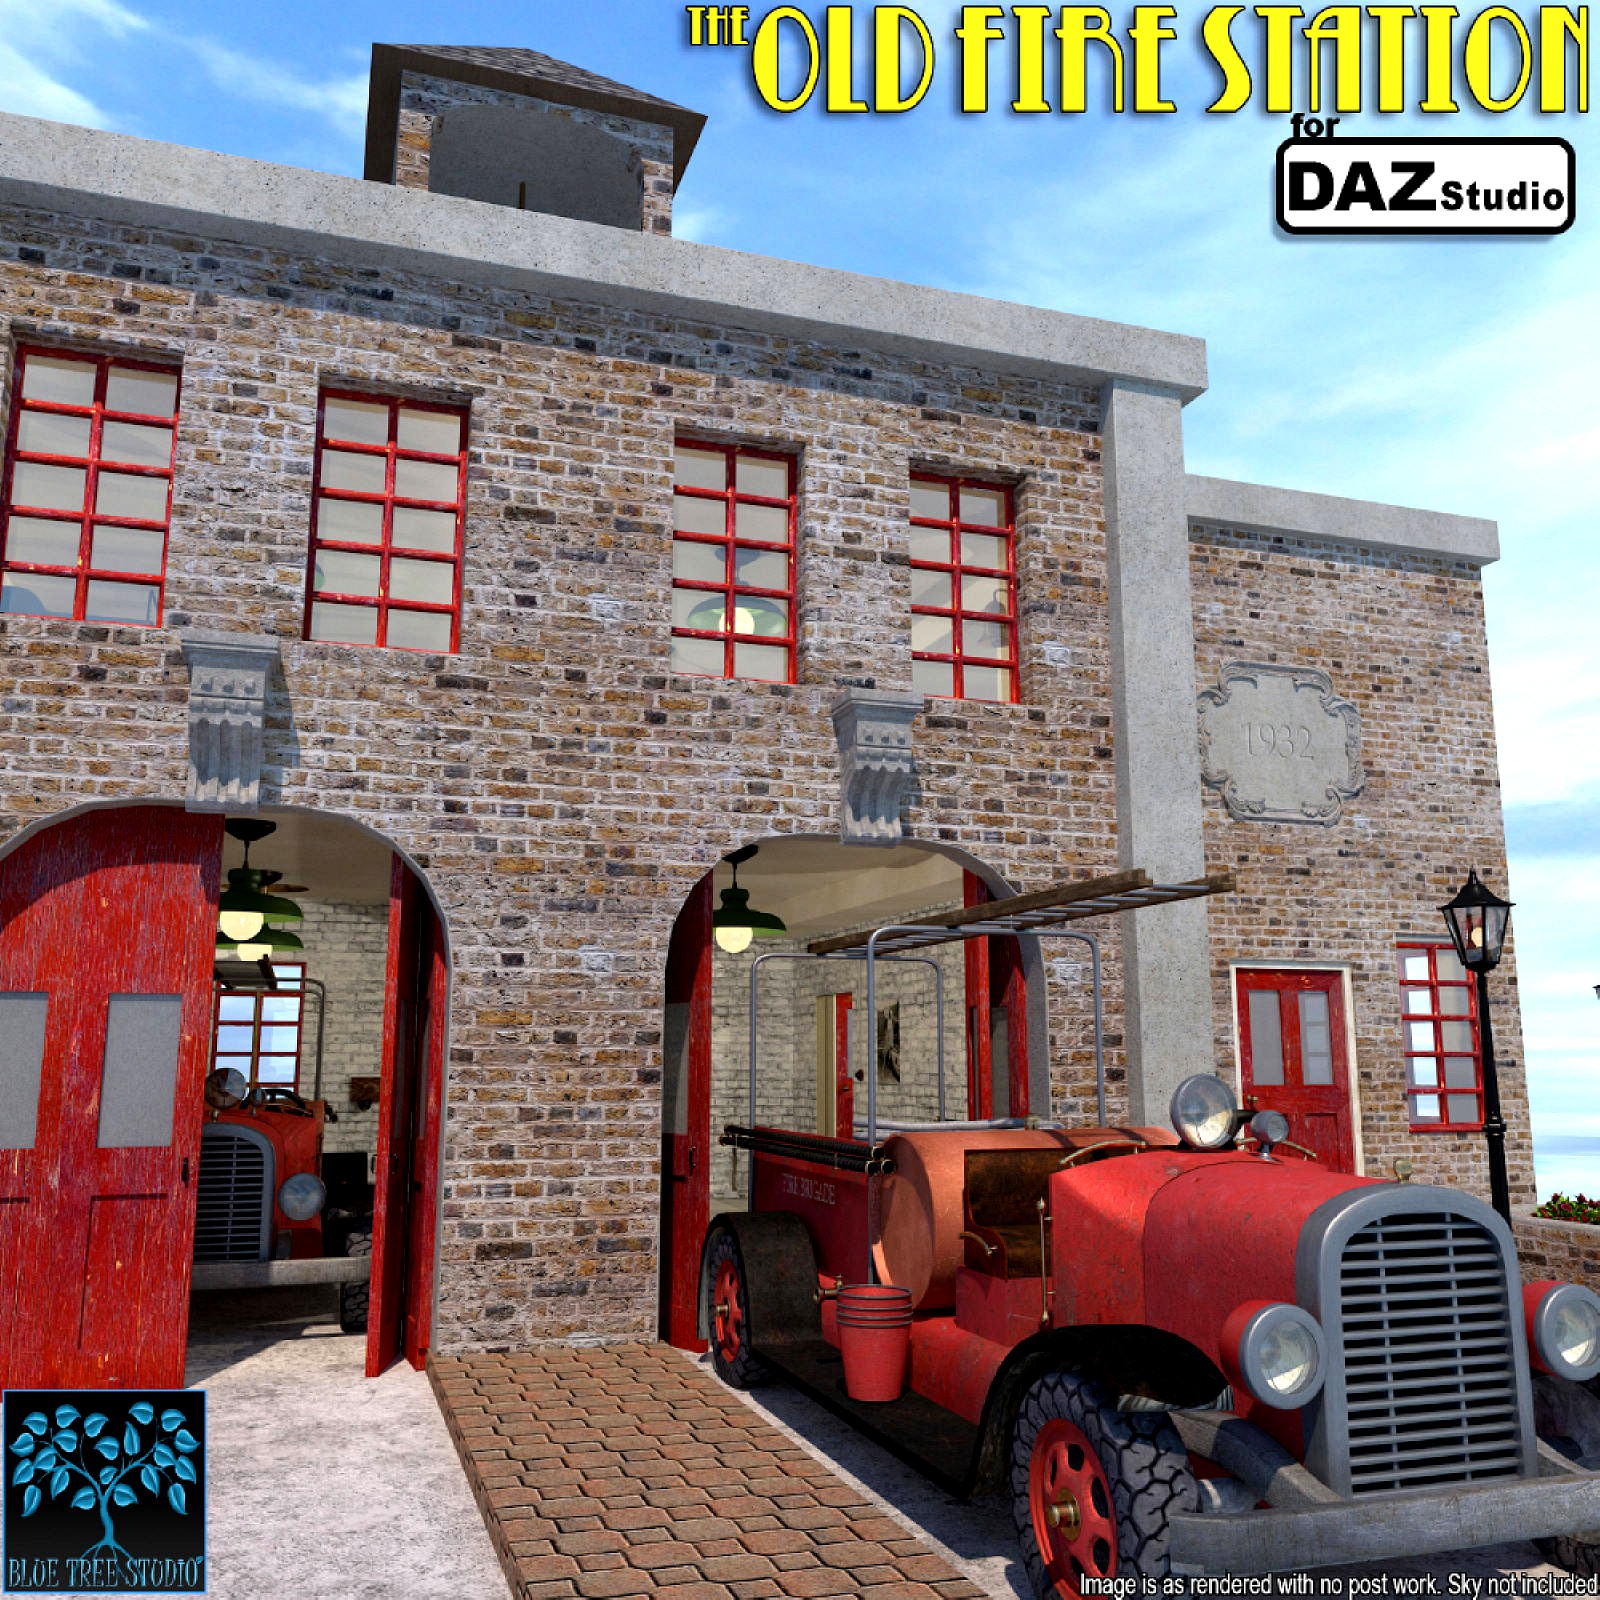 The Old Fire Station for Daz Studio